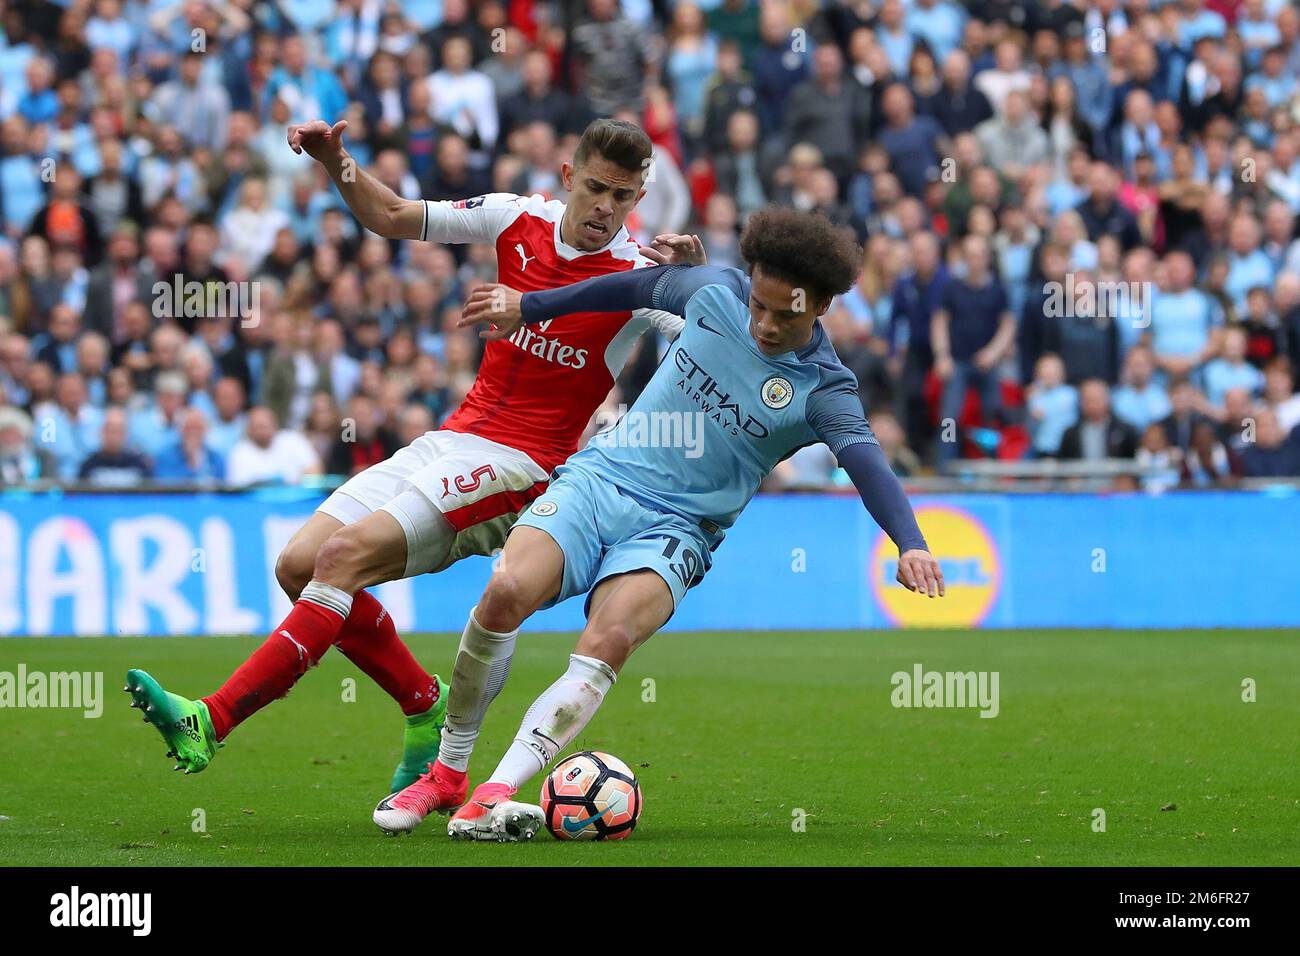 Leroy Sane of Manchester City and Gabriel Paulista of Arsenal - Arsenal v Manchester City, The Emirates FA Cup Semi Final, Wembley Stadium, London - 23rd April 2017. Stock Photo